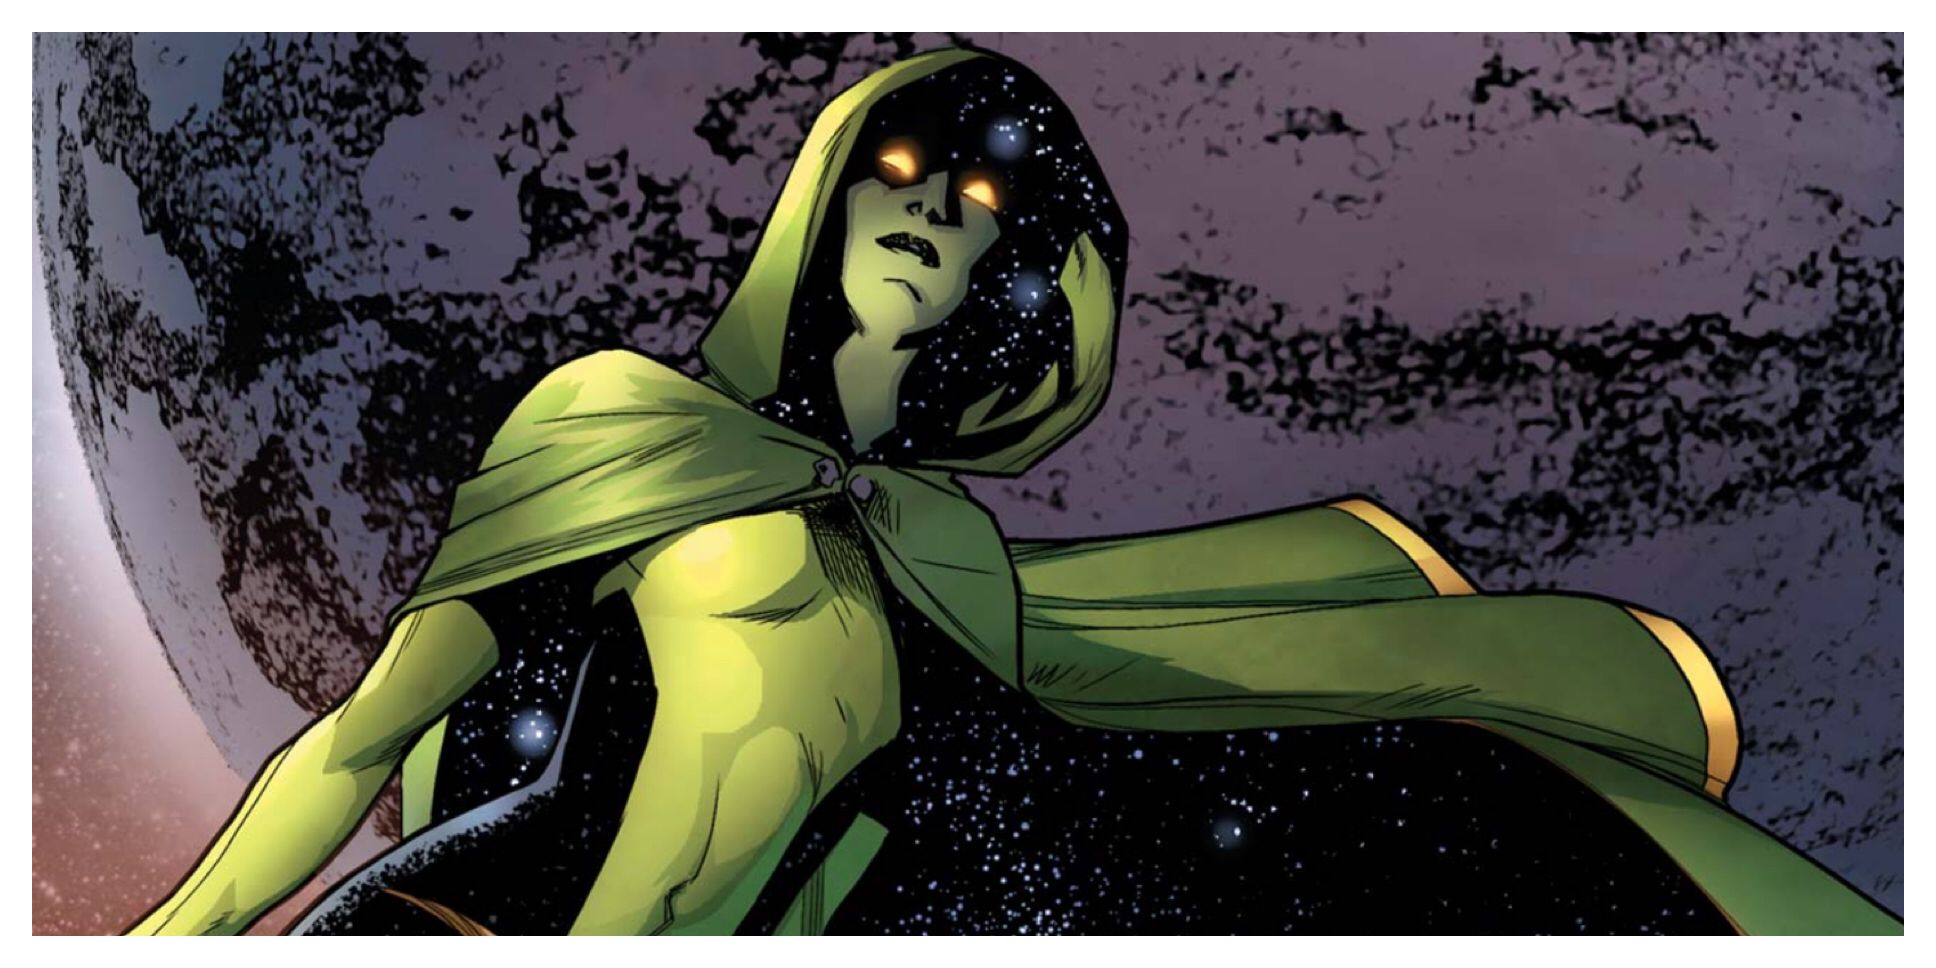 Gamora with Cosmic Power from the Black Vortex